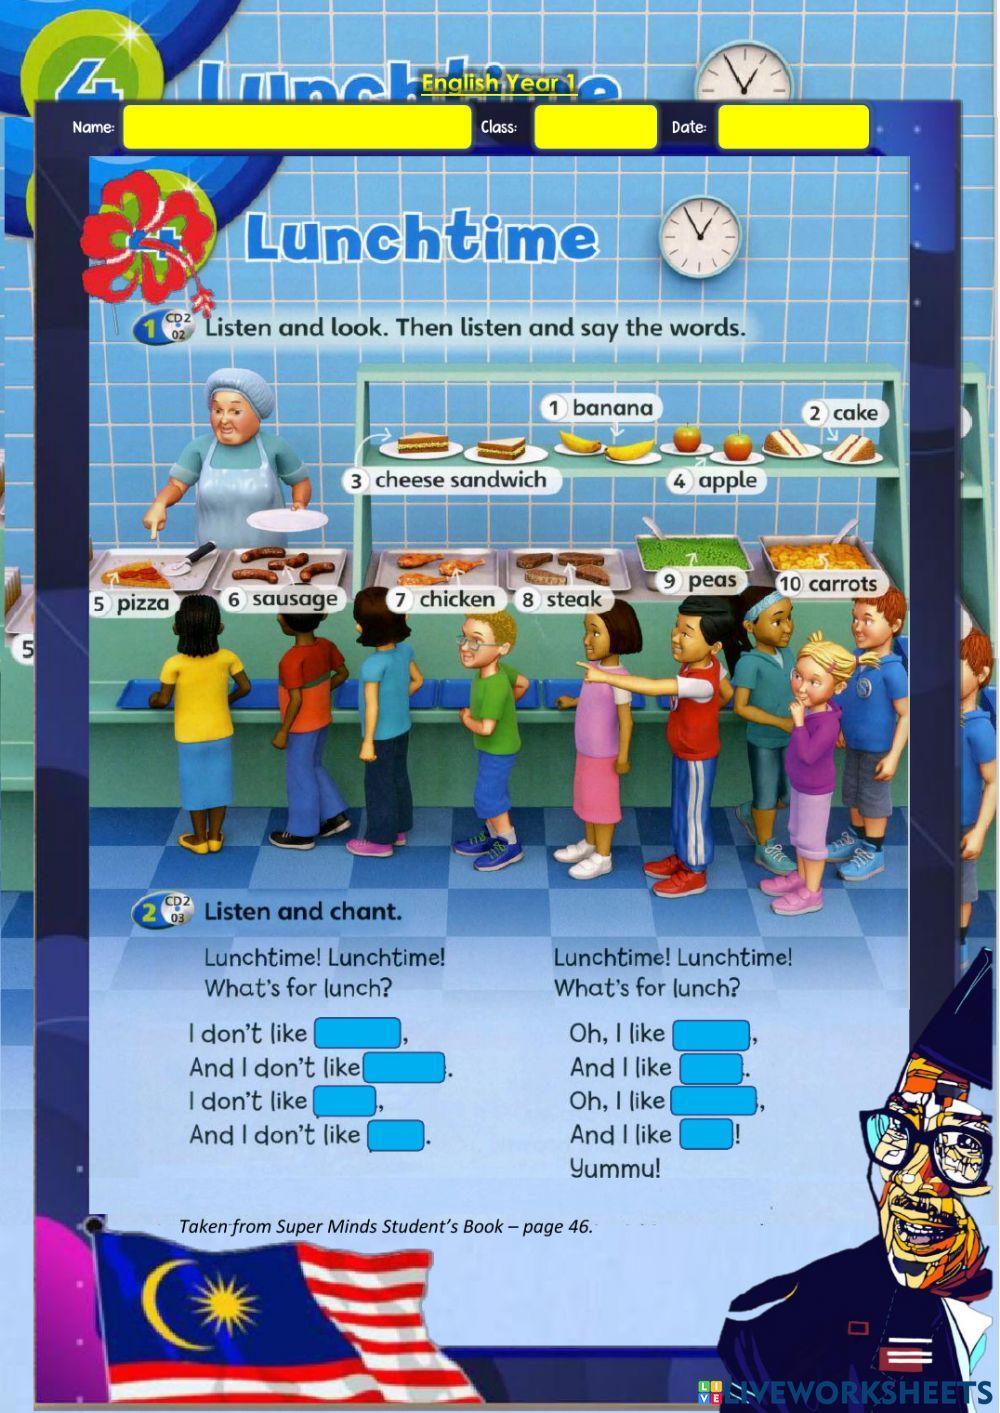 Year 1: Lunchtime 1 - Chant